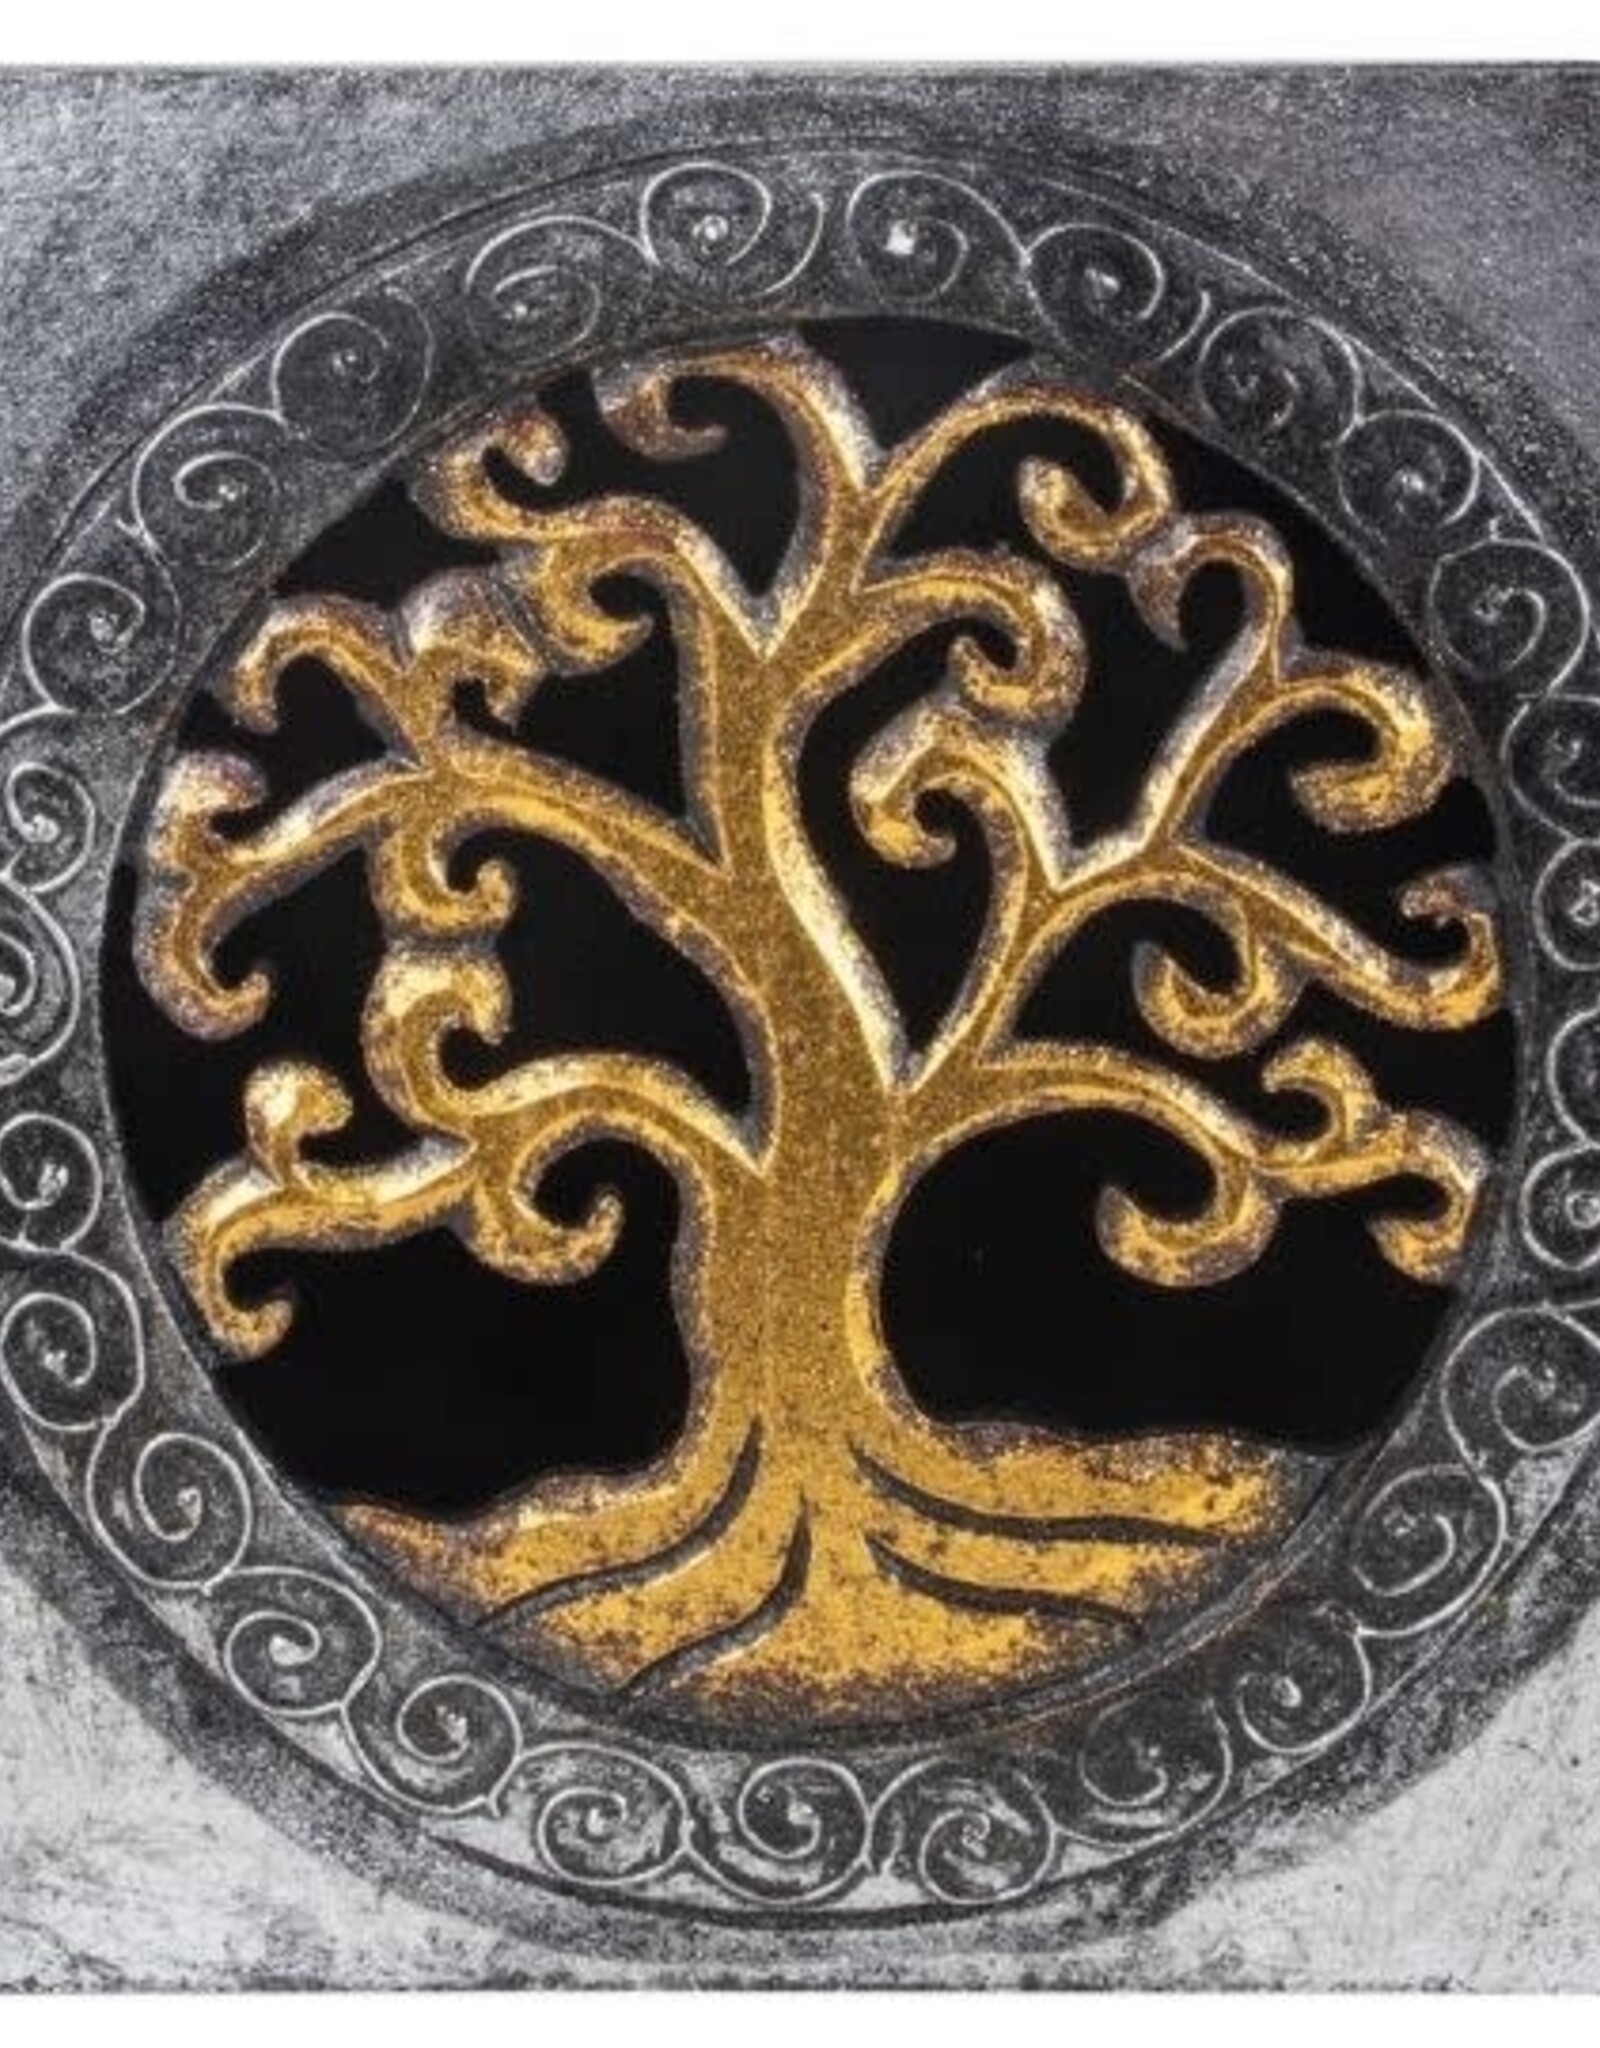 Wood Box Silver & Gold Tree of Life w Carved Lid 8x 8 x 3.5"H